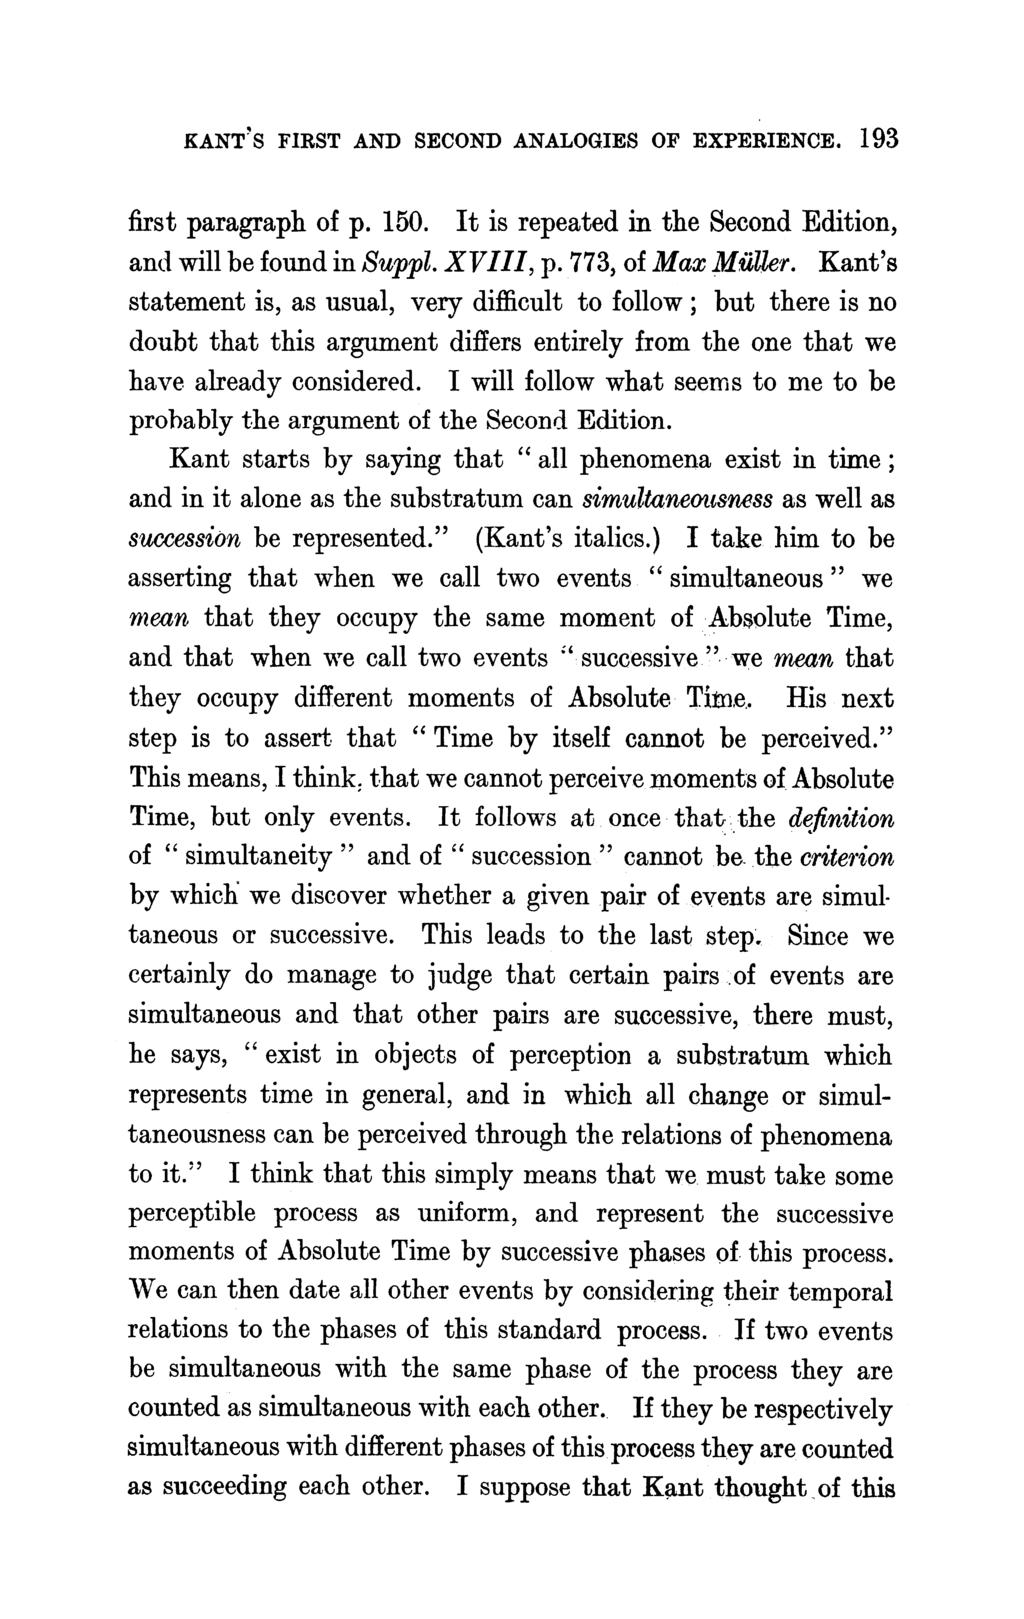 KANT'S FIRST AND SECOND ANALOGIES OF EXPERIENCE. 193 first paragraph of p. 150. It is repeated in the Second Edition, and will be found in Suppl. XVIII, p. 773, of Max MuUller.